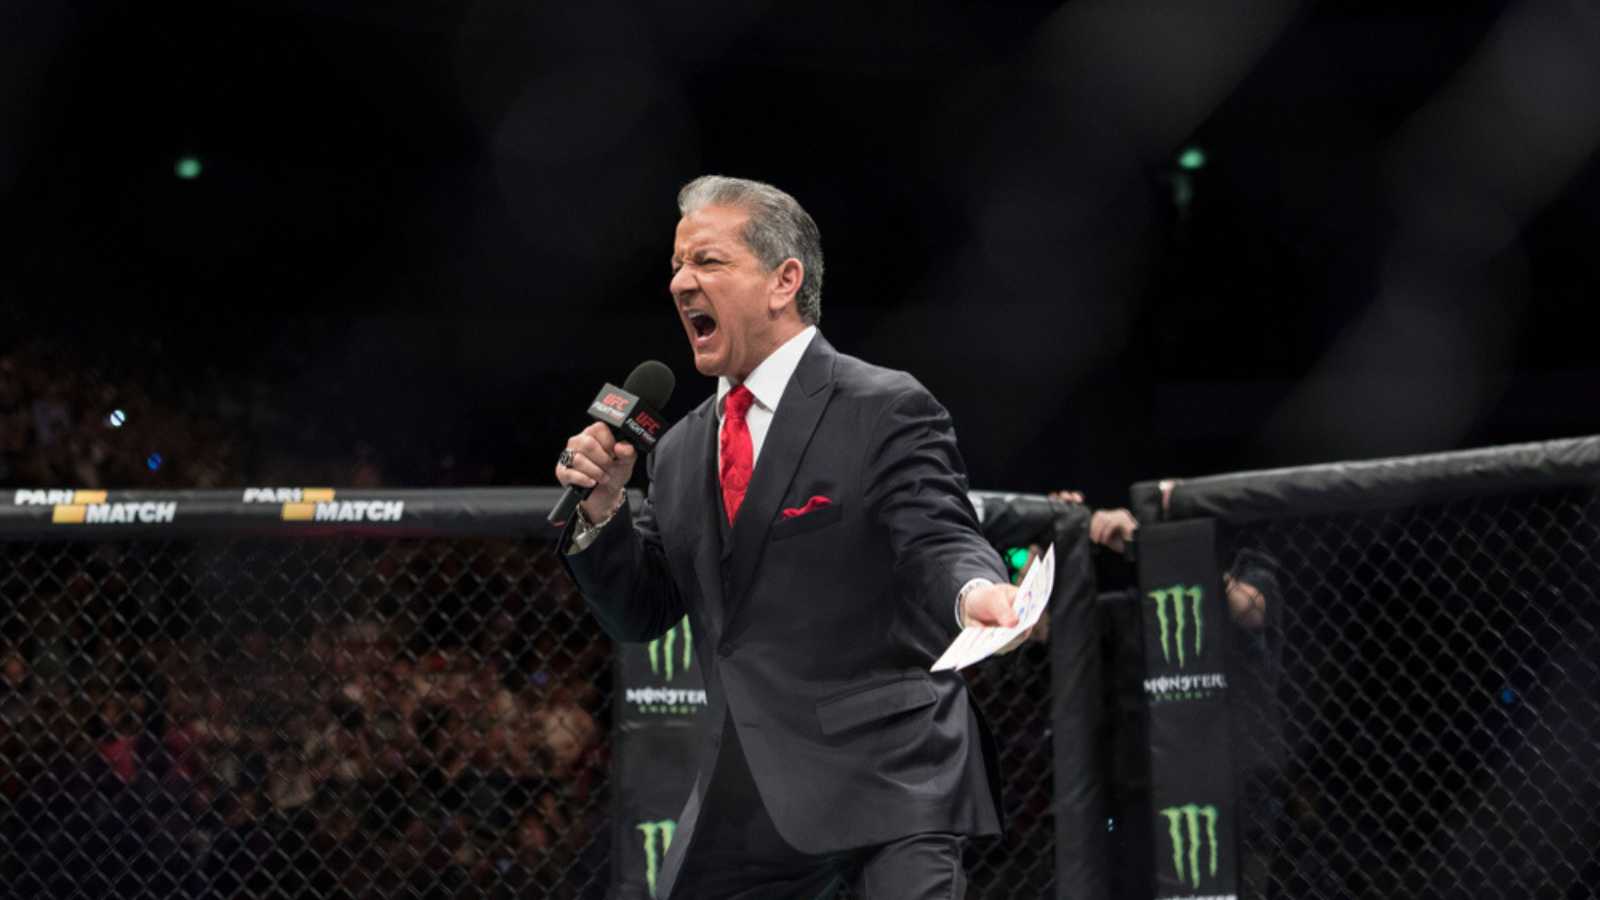 MMA octagon announcer Bruce Buffer during UFC Moscow Fight Night: Hunt vs. Oliynyk. "Olympiisky" Stadium in Moscow, Russia. 15th of September 2018.